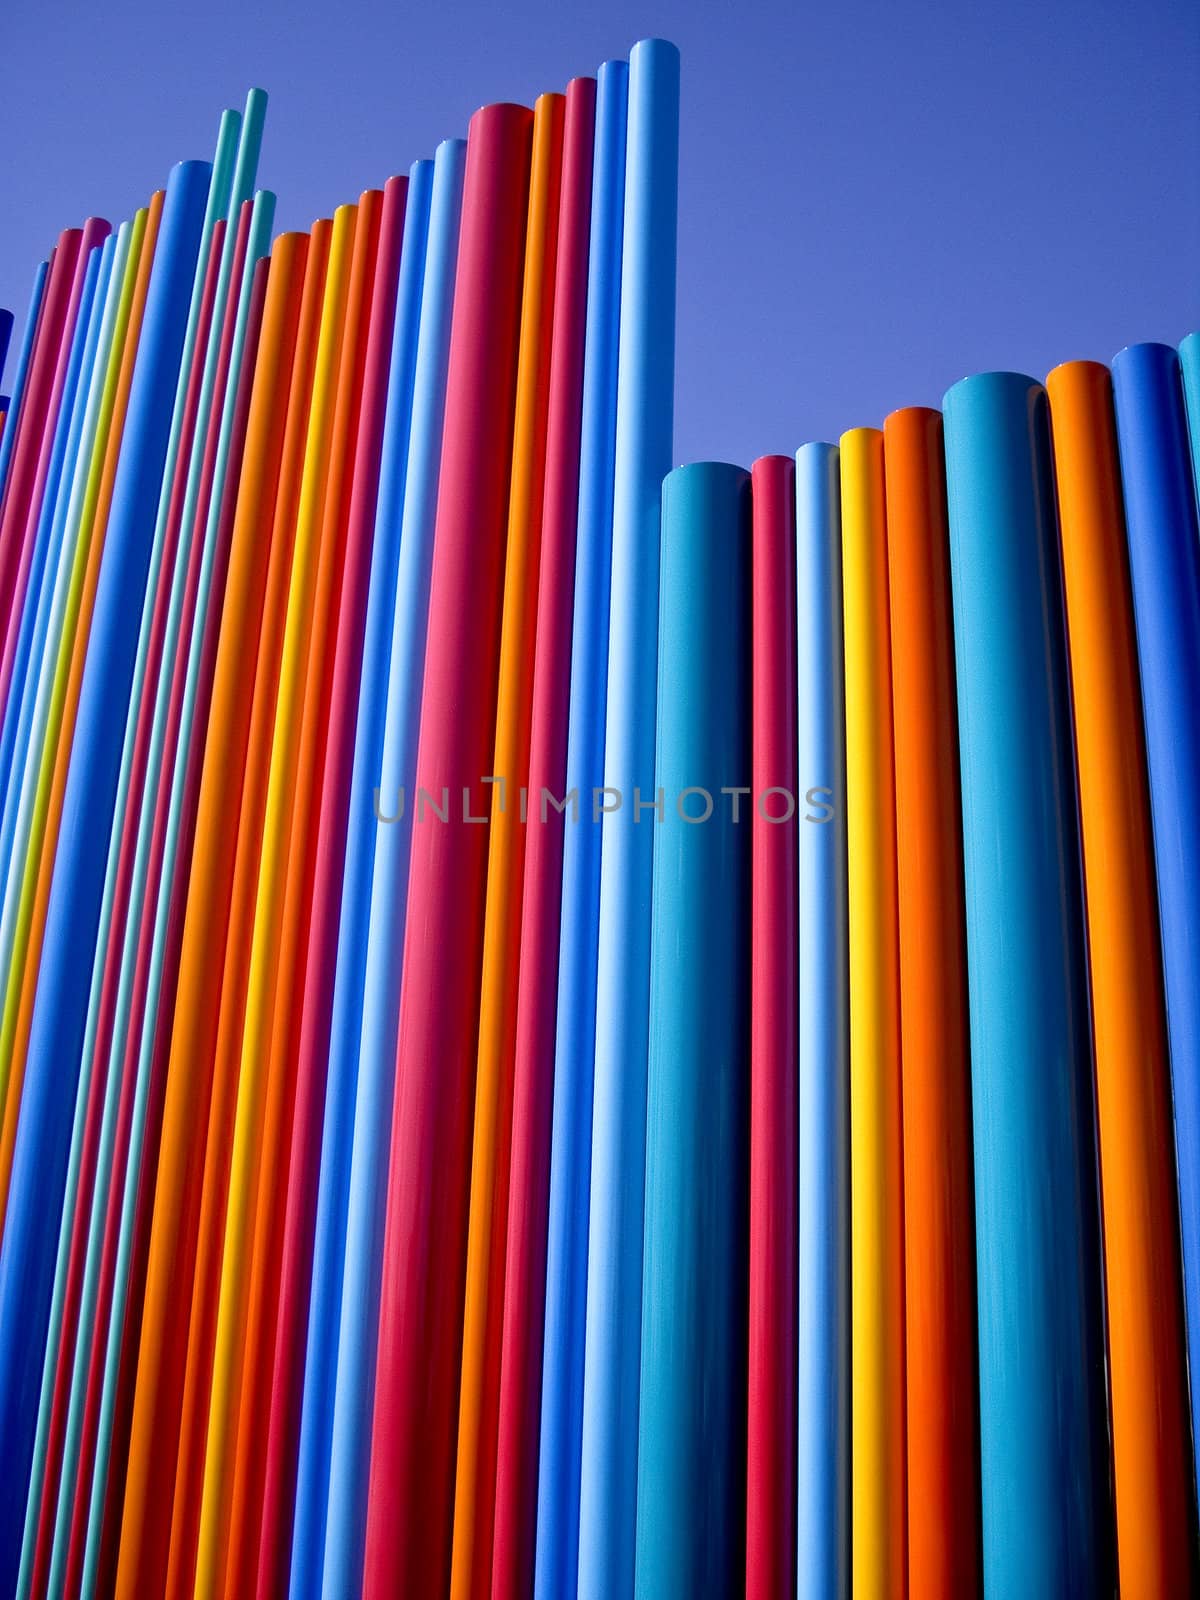 Poles of Primary Colors 1 by emattil